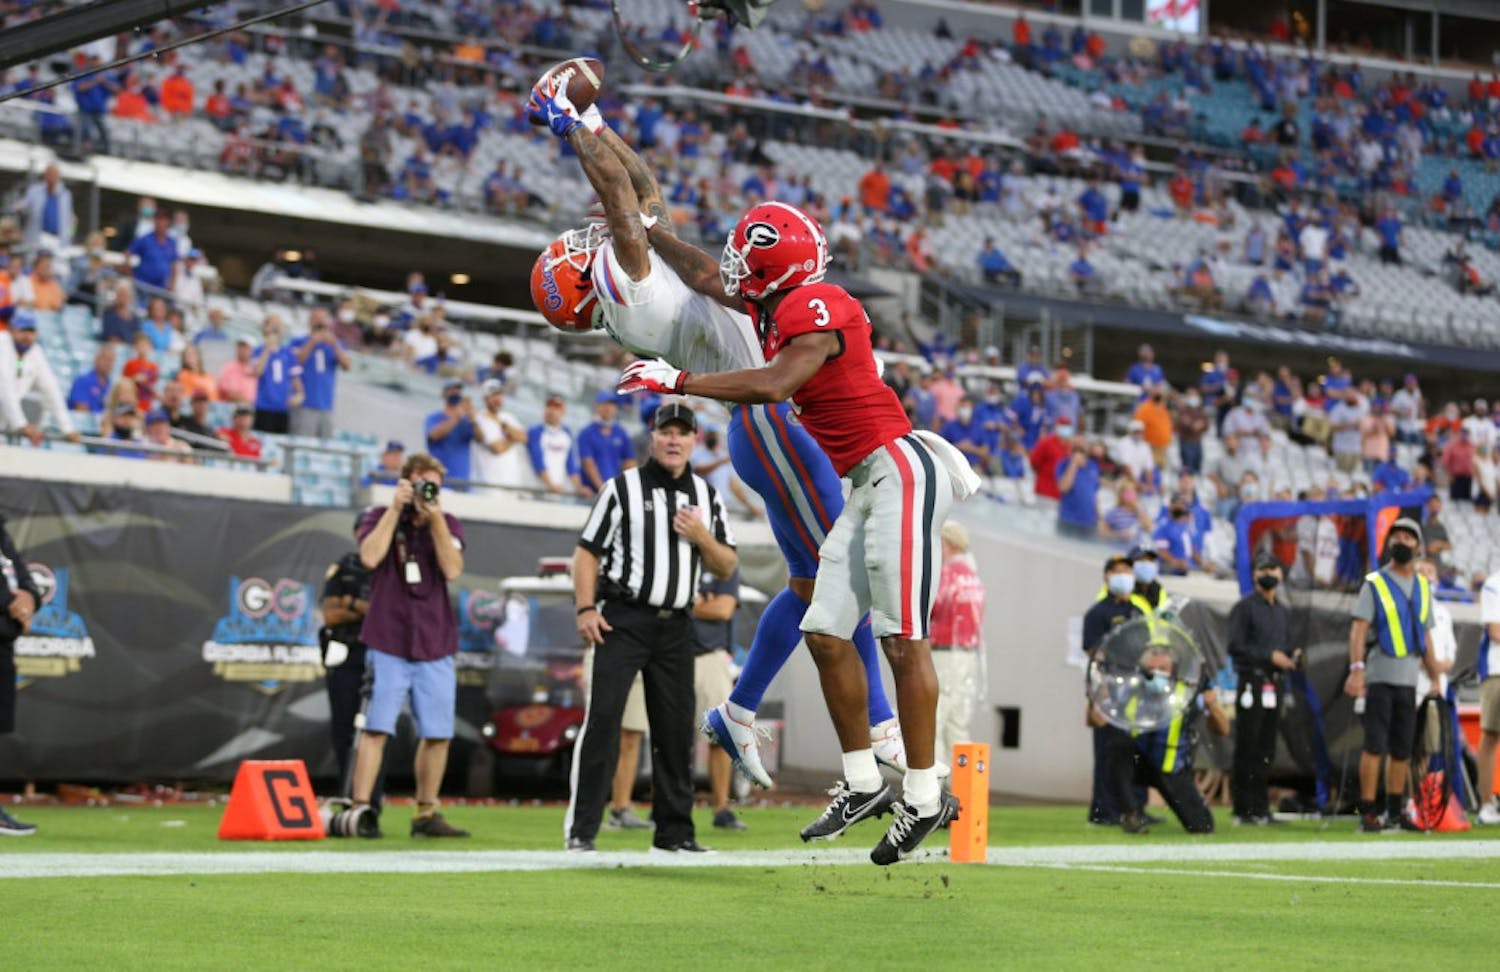 Wide receiver Trevon Grimes stretches to catch the football ball thrown by Gators quarterback Kyle Trask and score a touchdown for Florida against Georgia at TIAA Bank Field on Nov. 7, 2020.